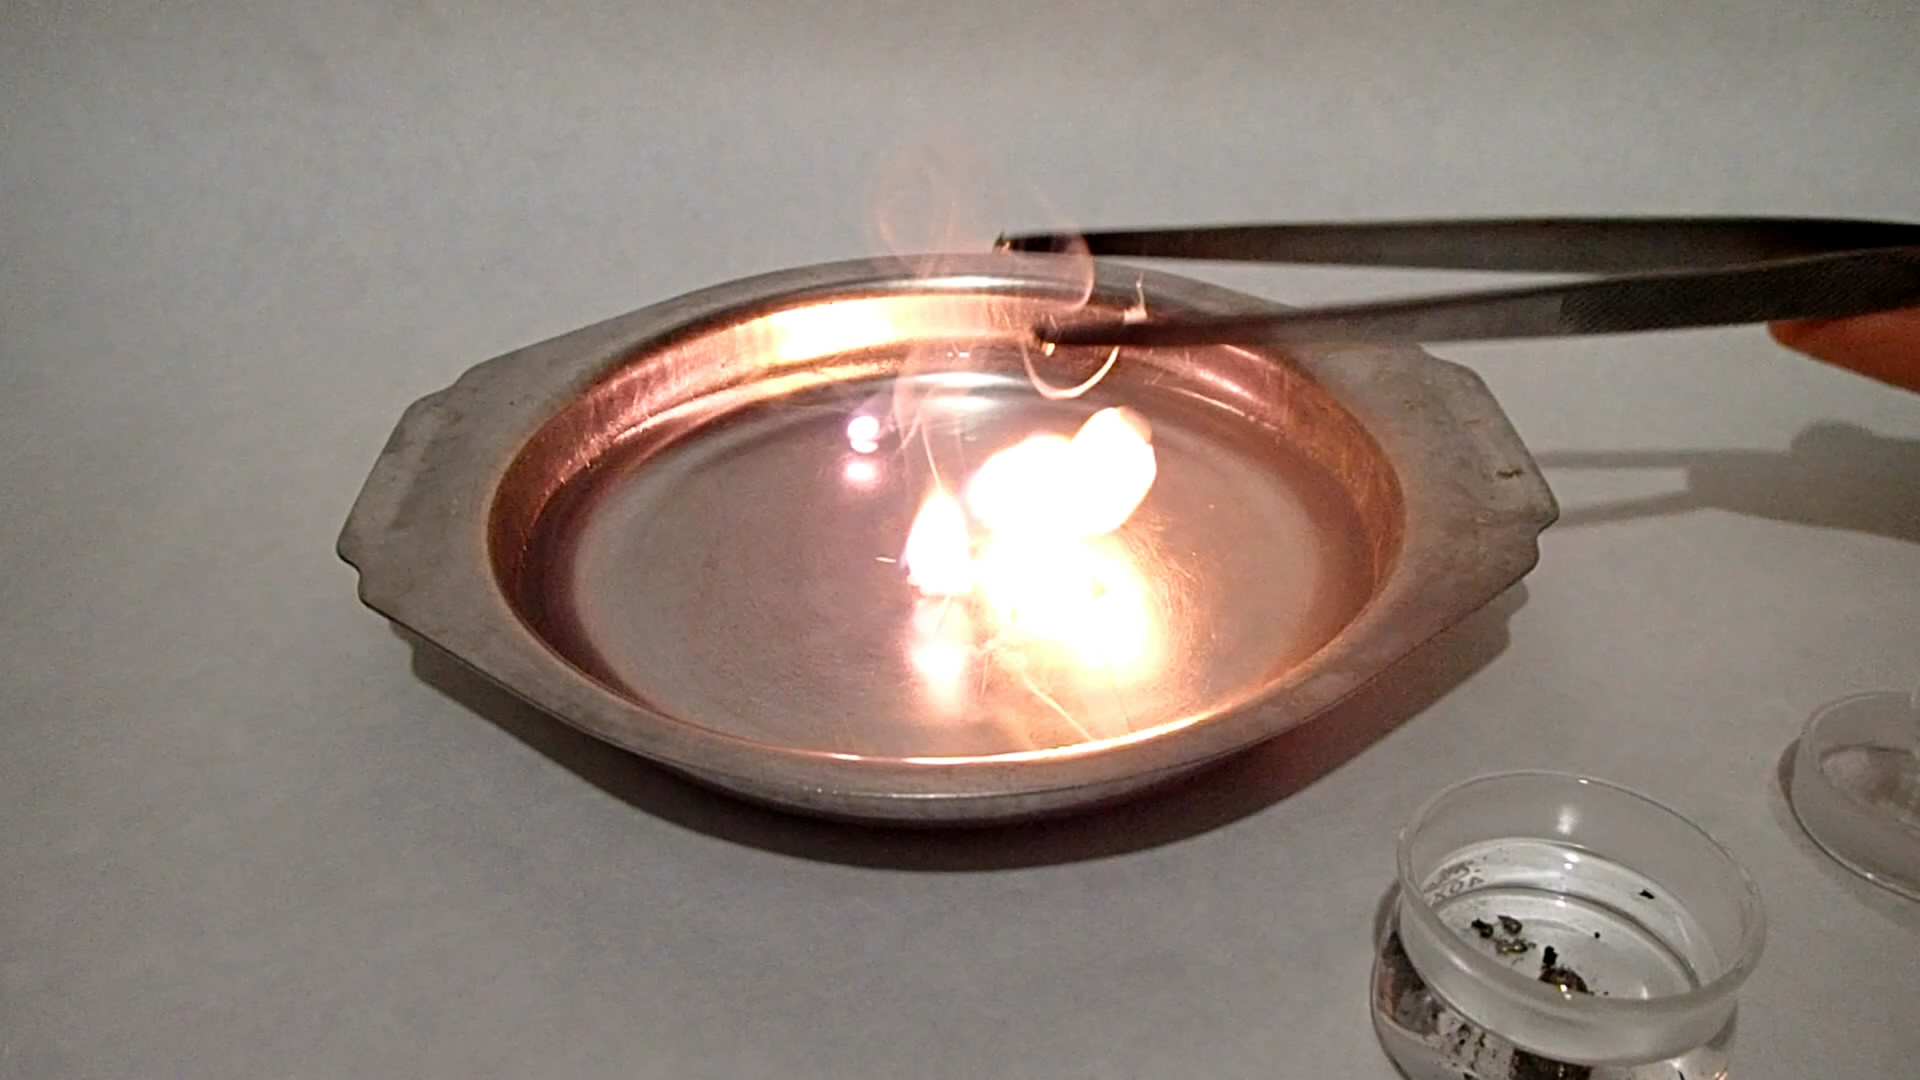 caesium reaction with water